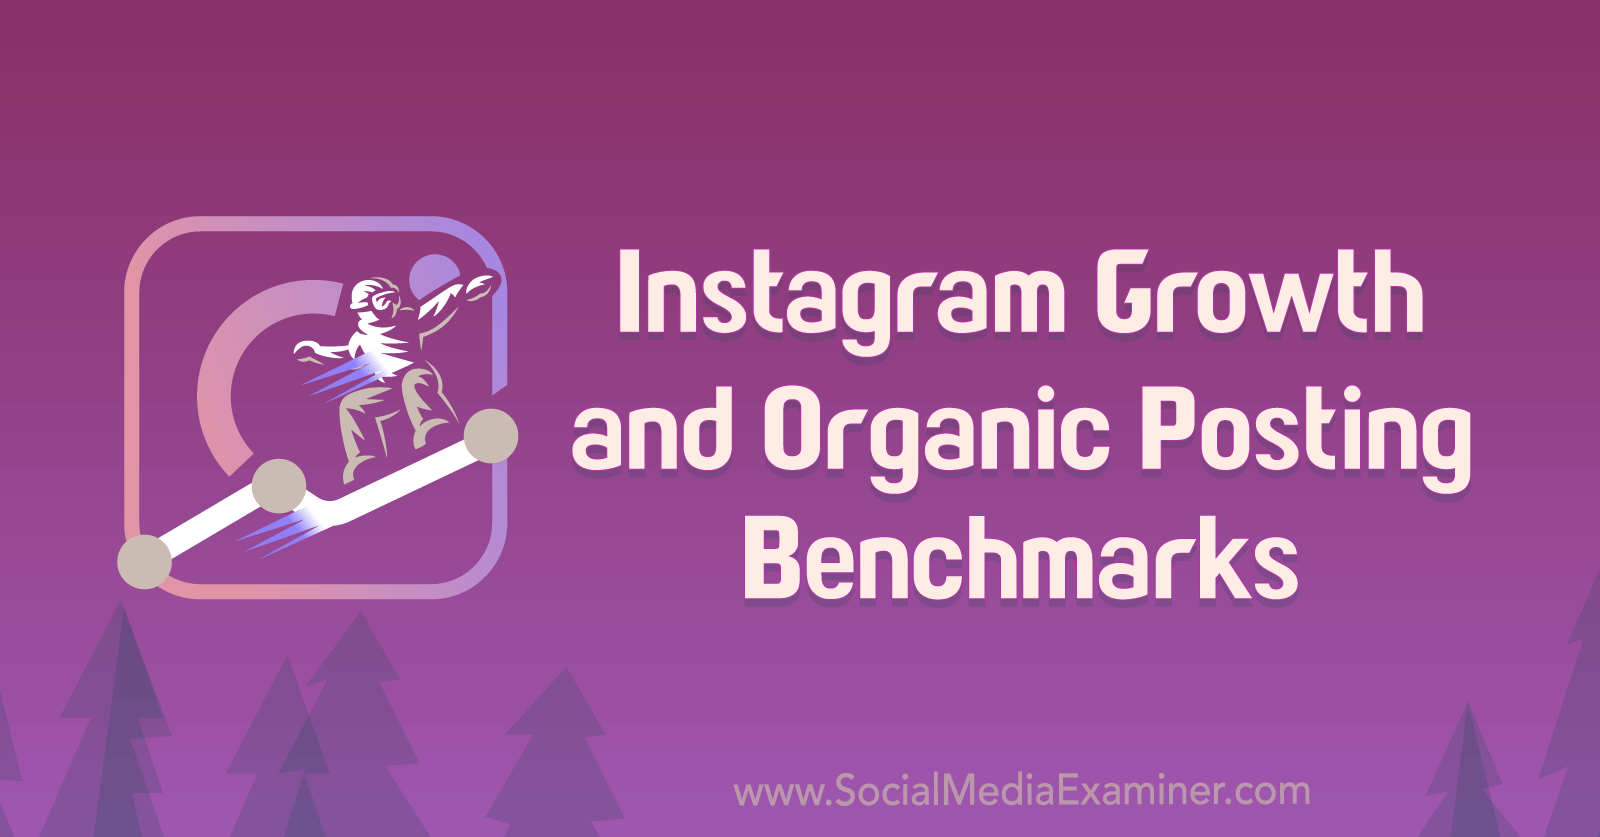 Instagram Growth and Organic Posting Benchmarks by Michael Stelzner
